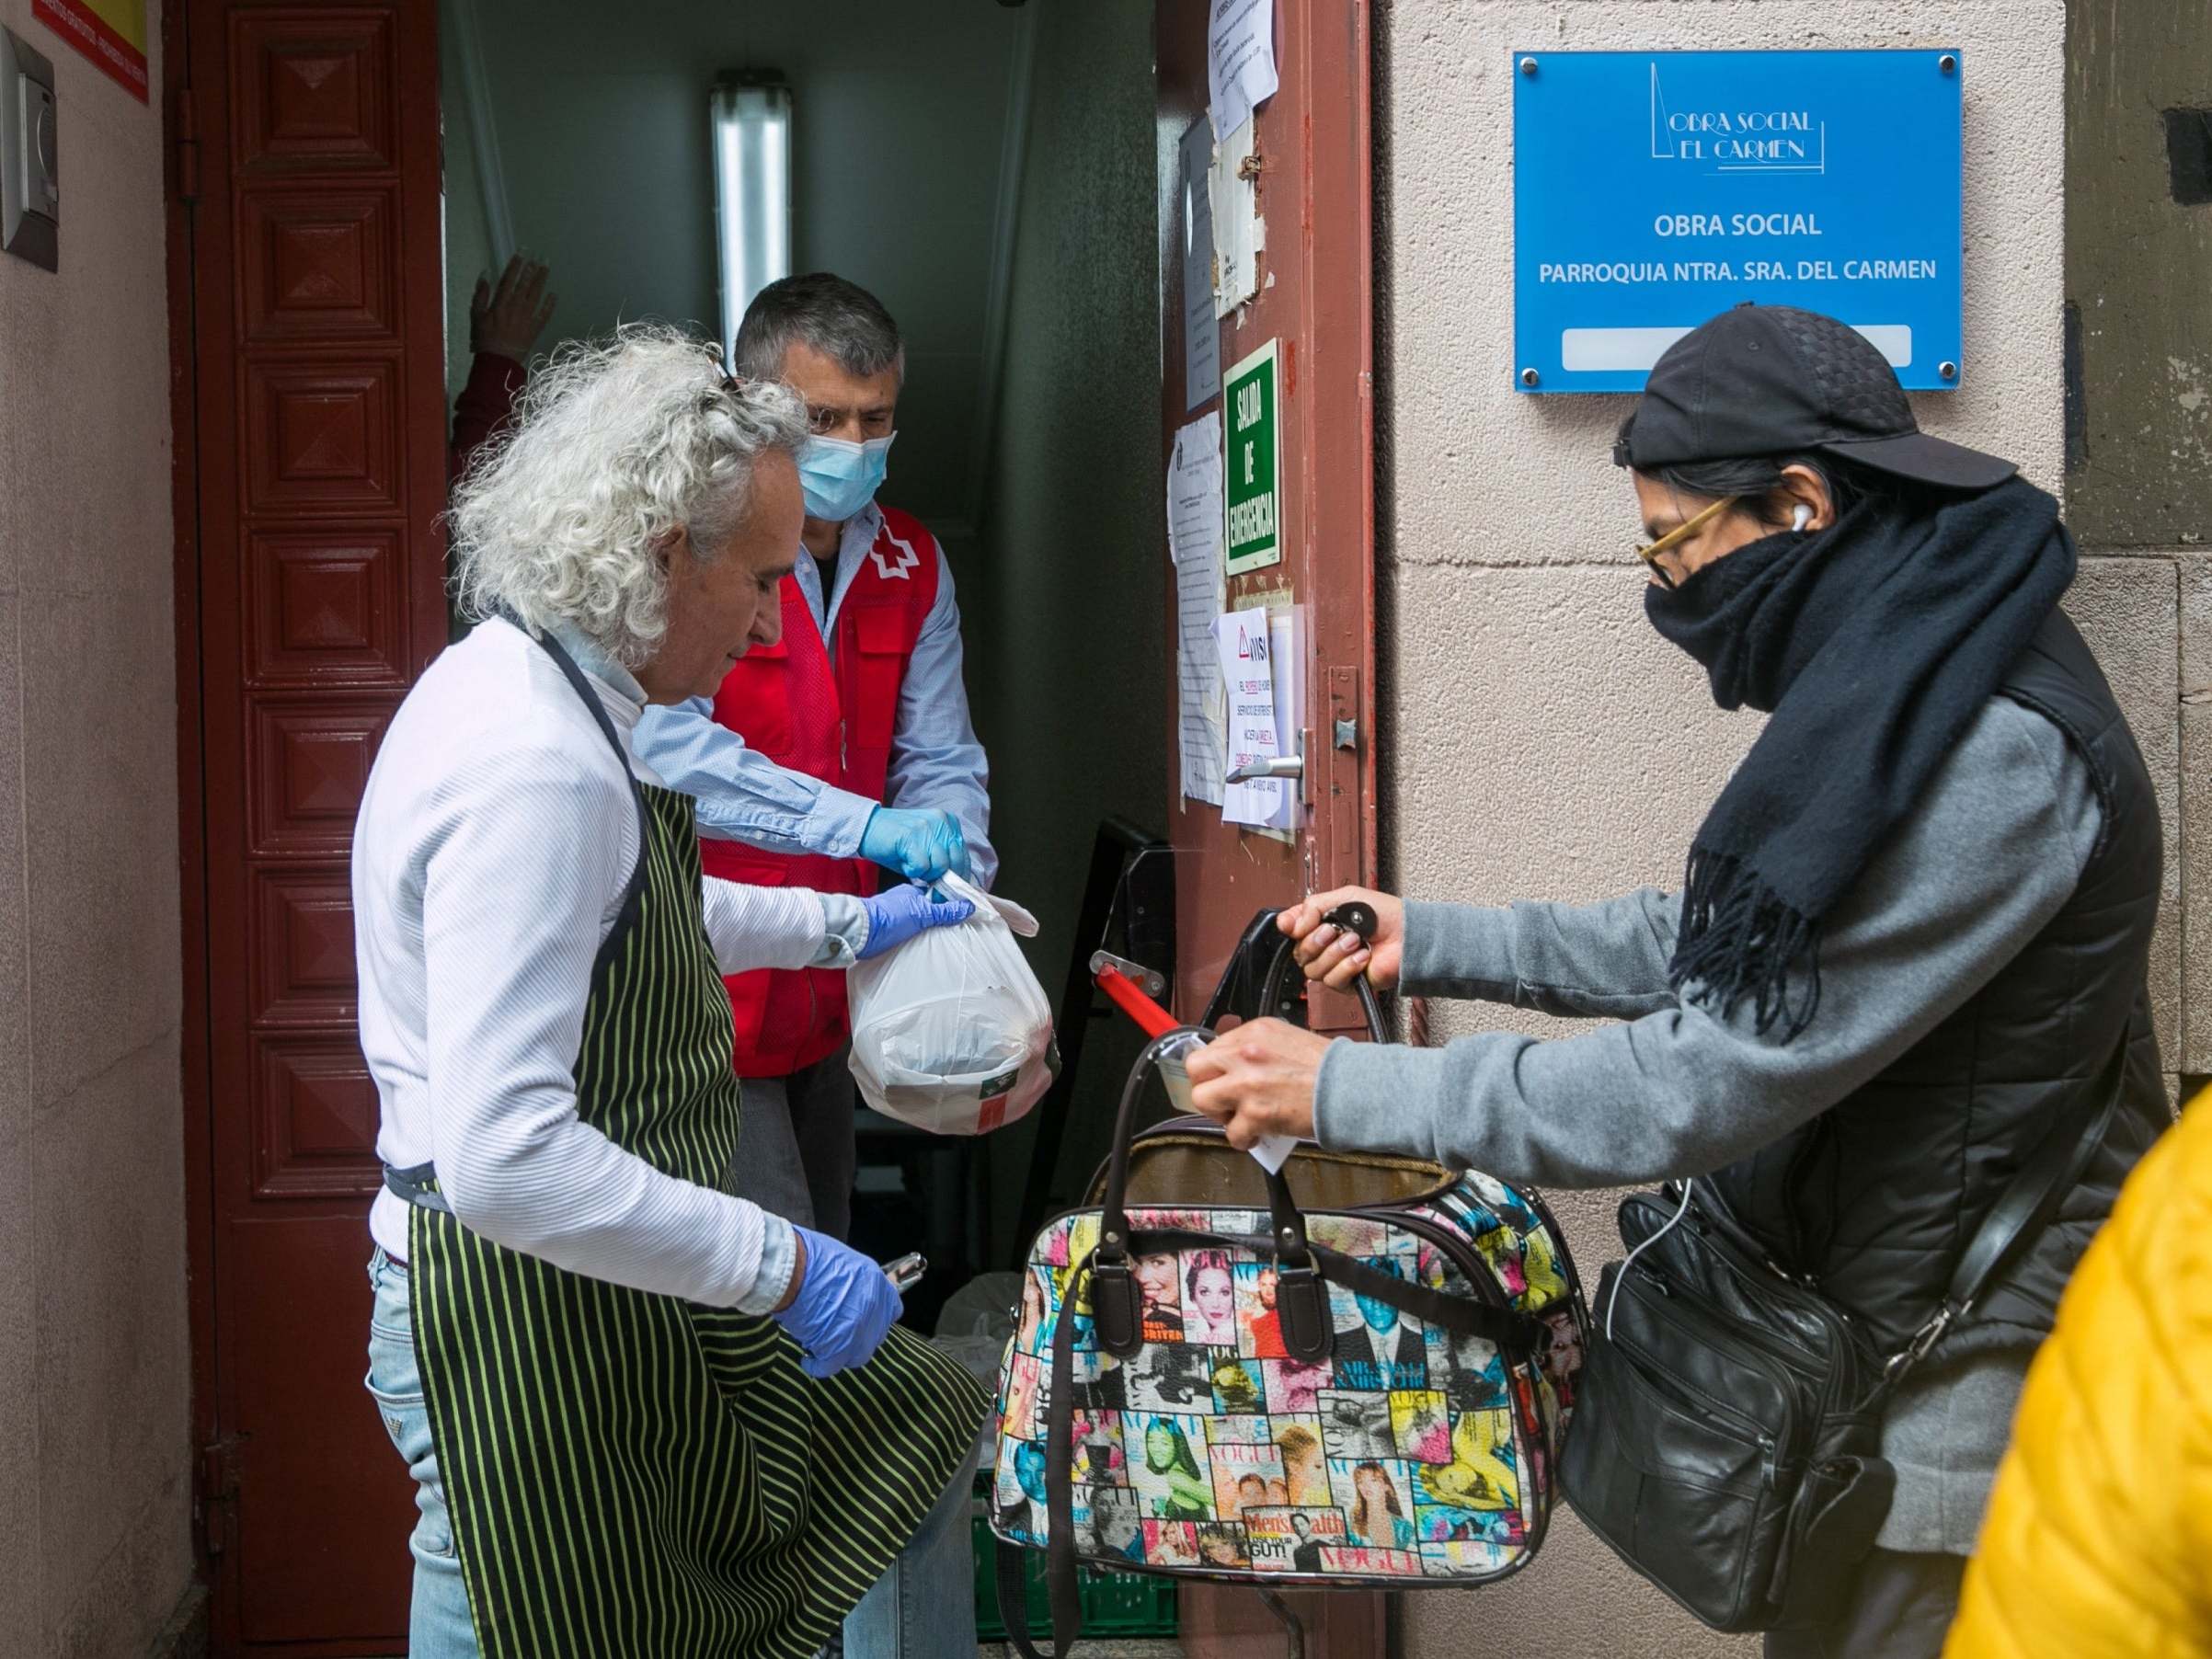 Volunteers from a parish give away bag with food to people in need in Zaragoza, Spain